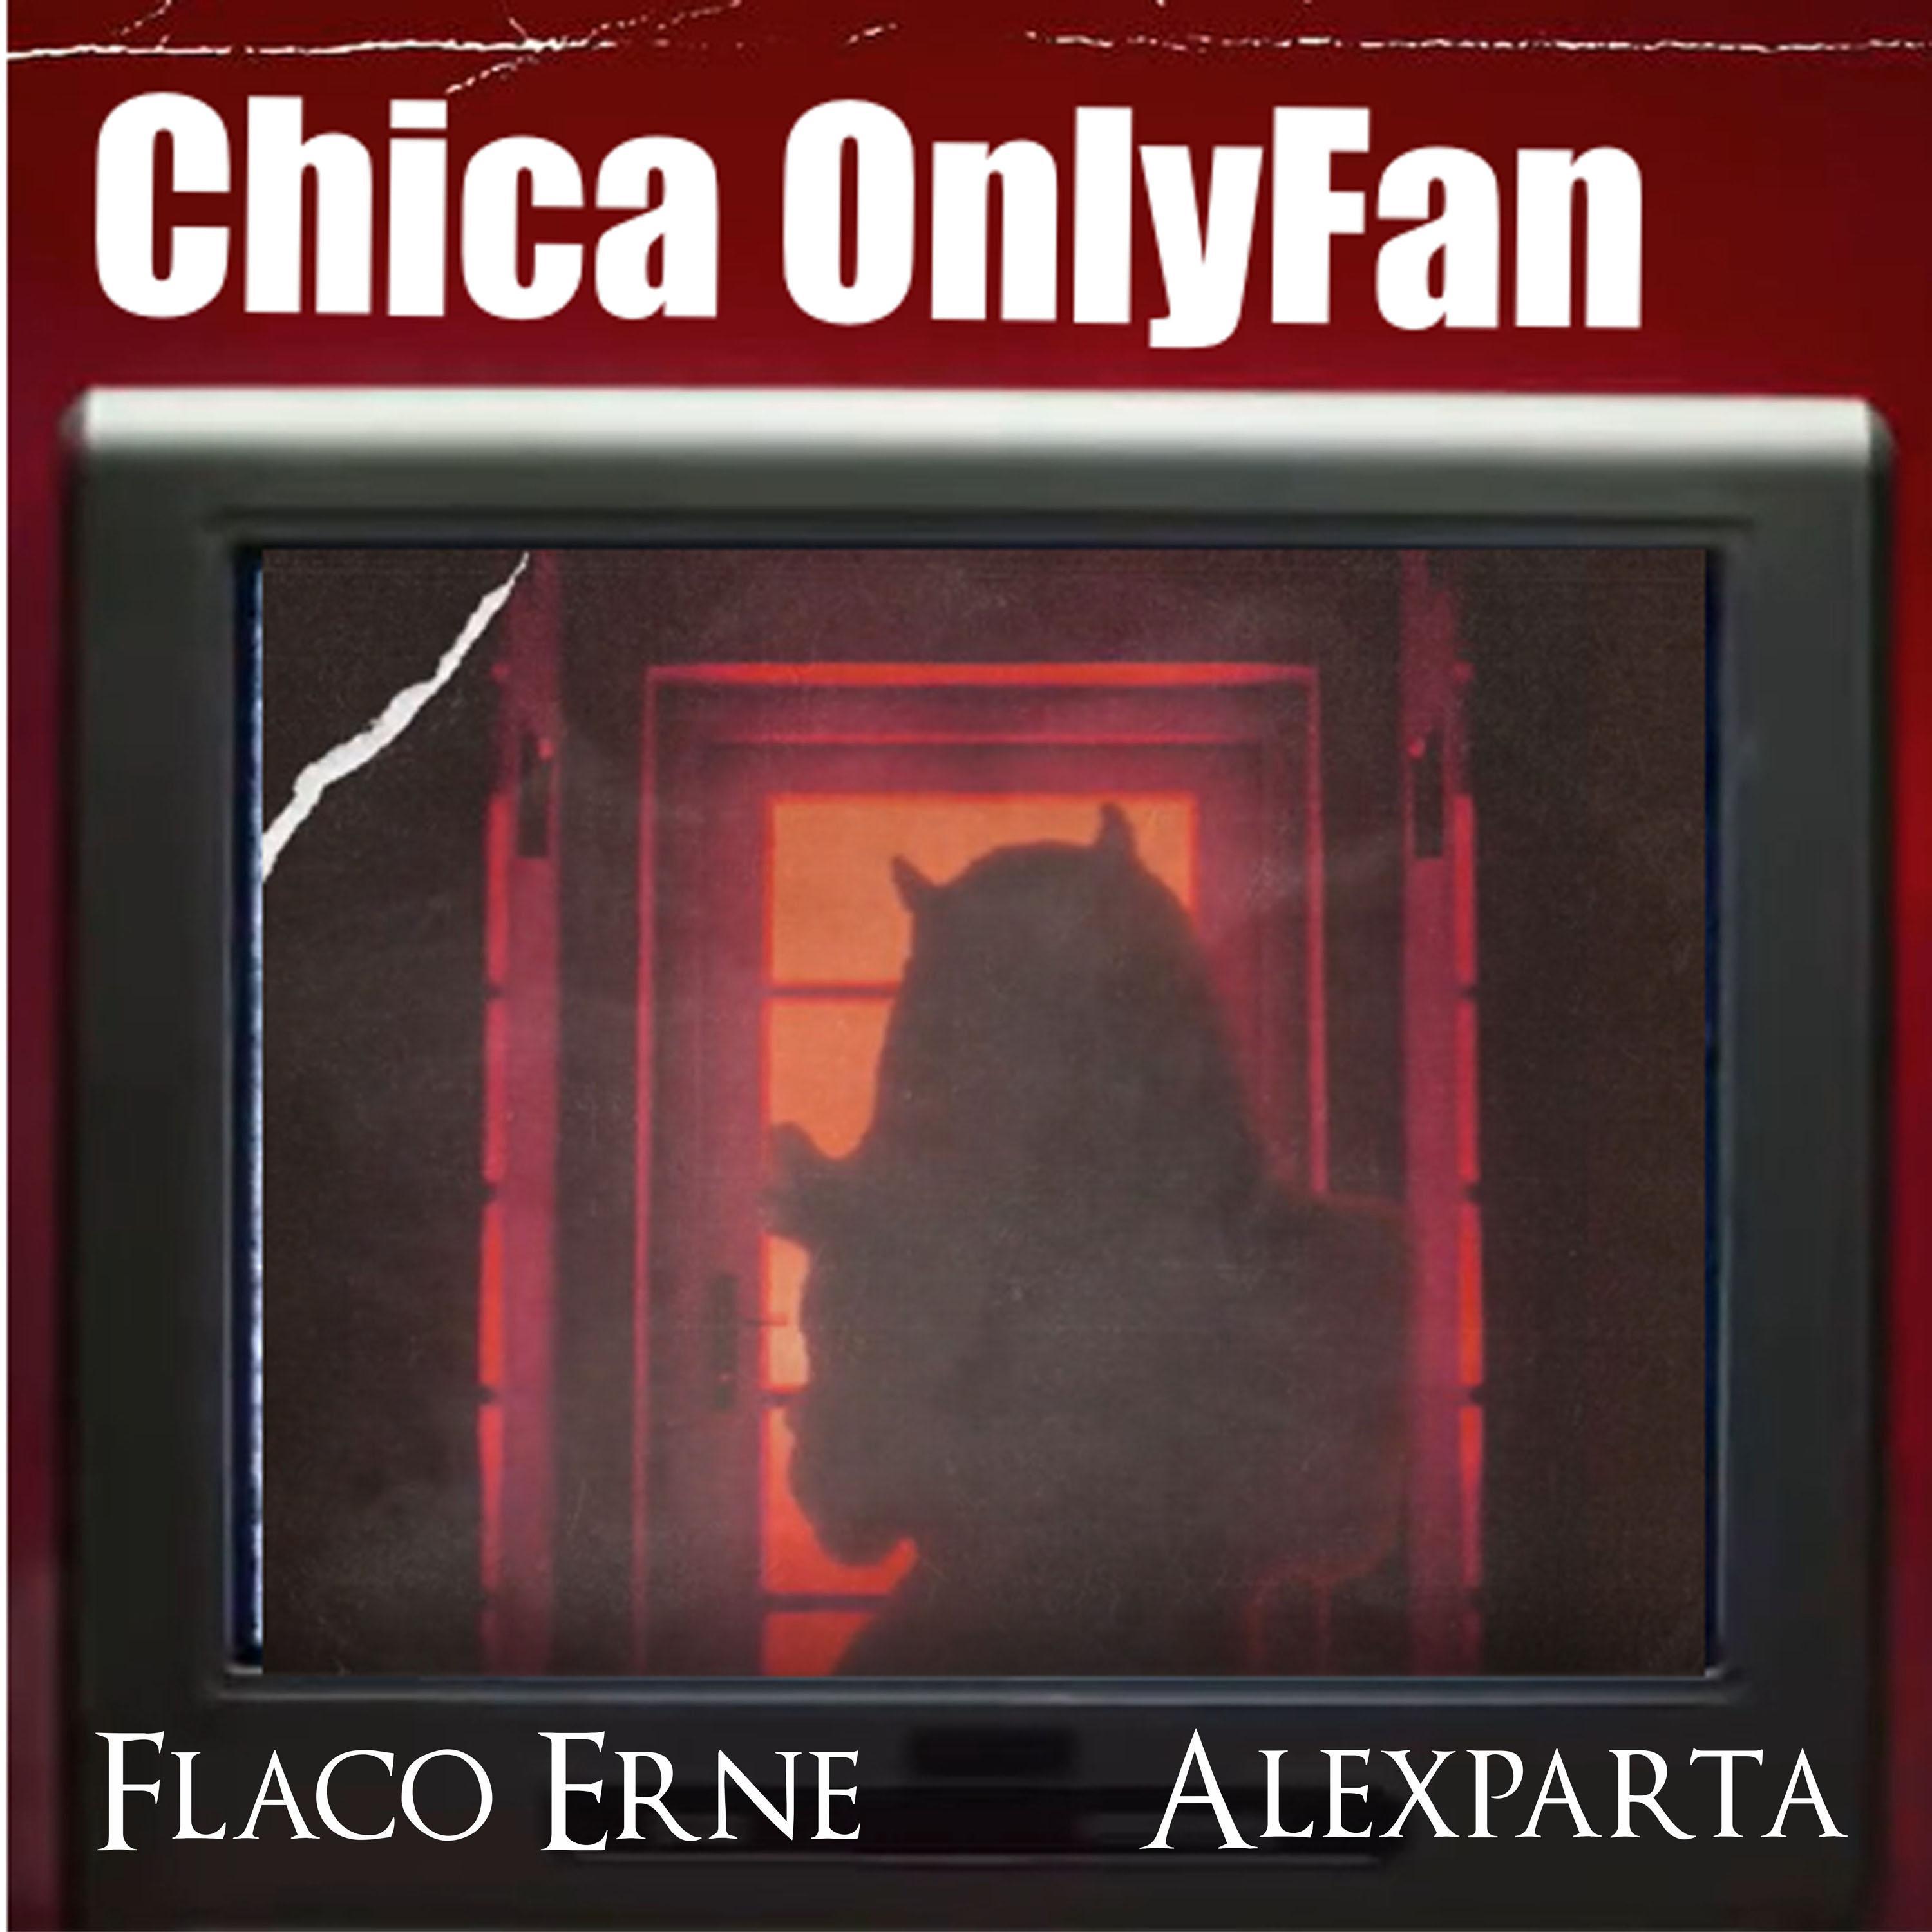 Alexparta - Chica Onlyfan (feat. Flaco Erne)